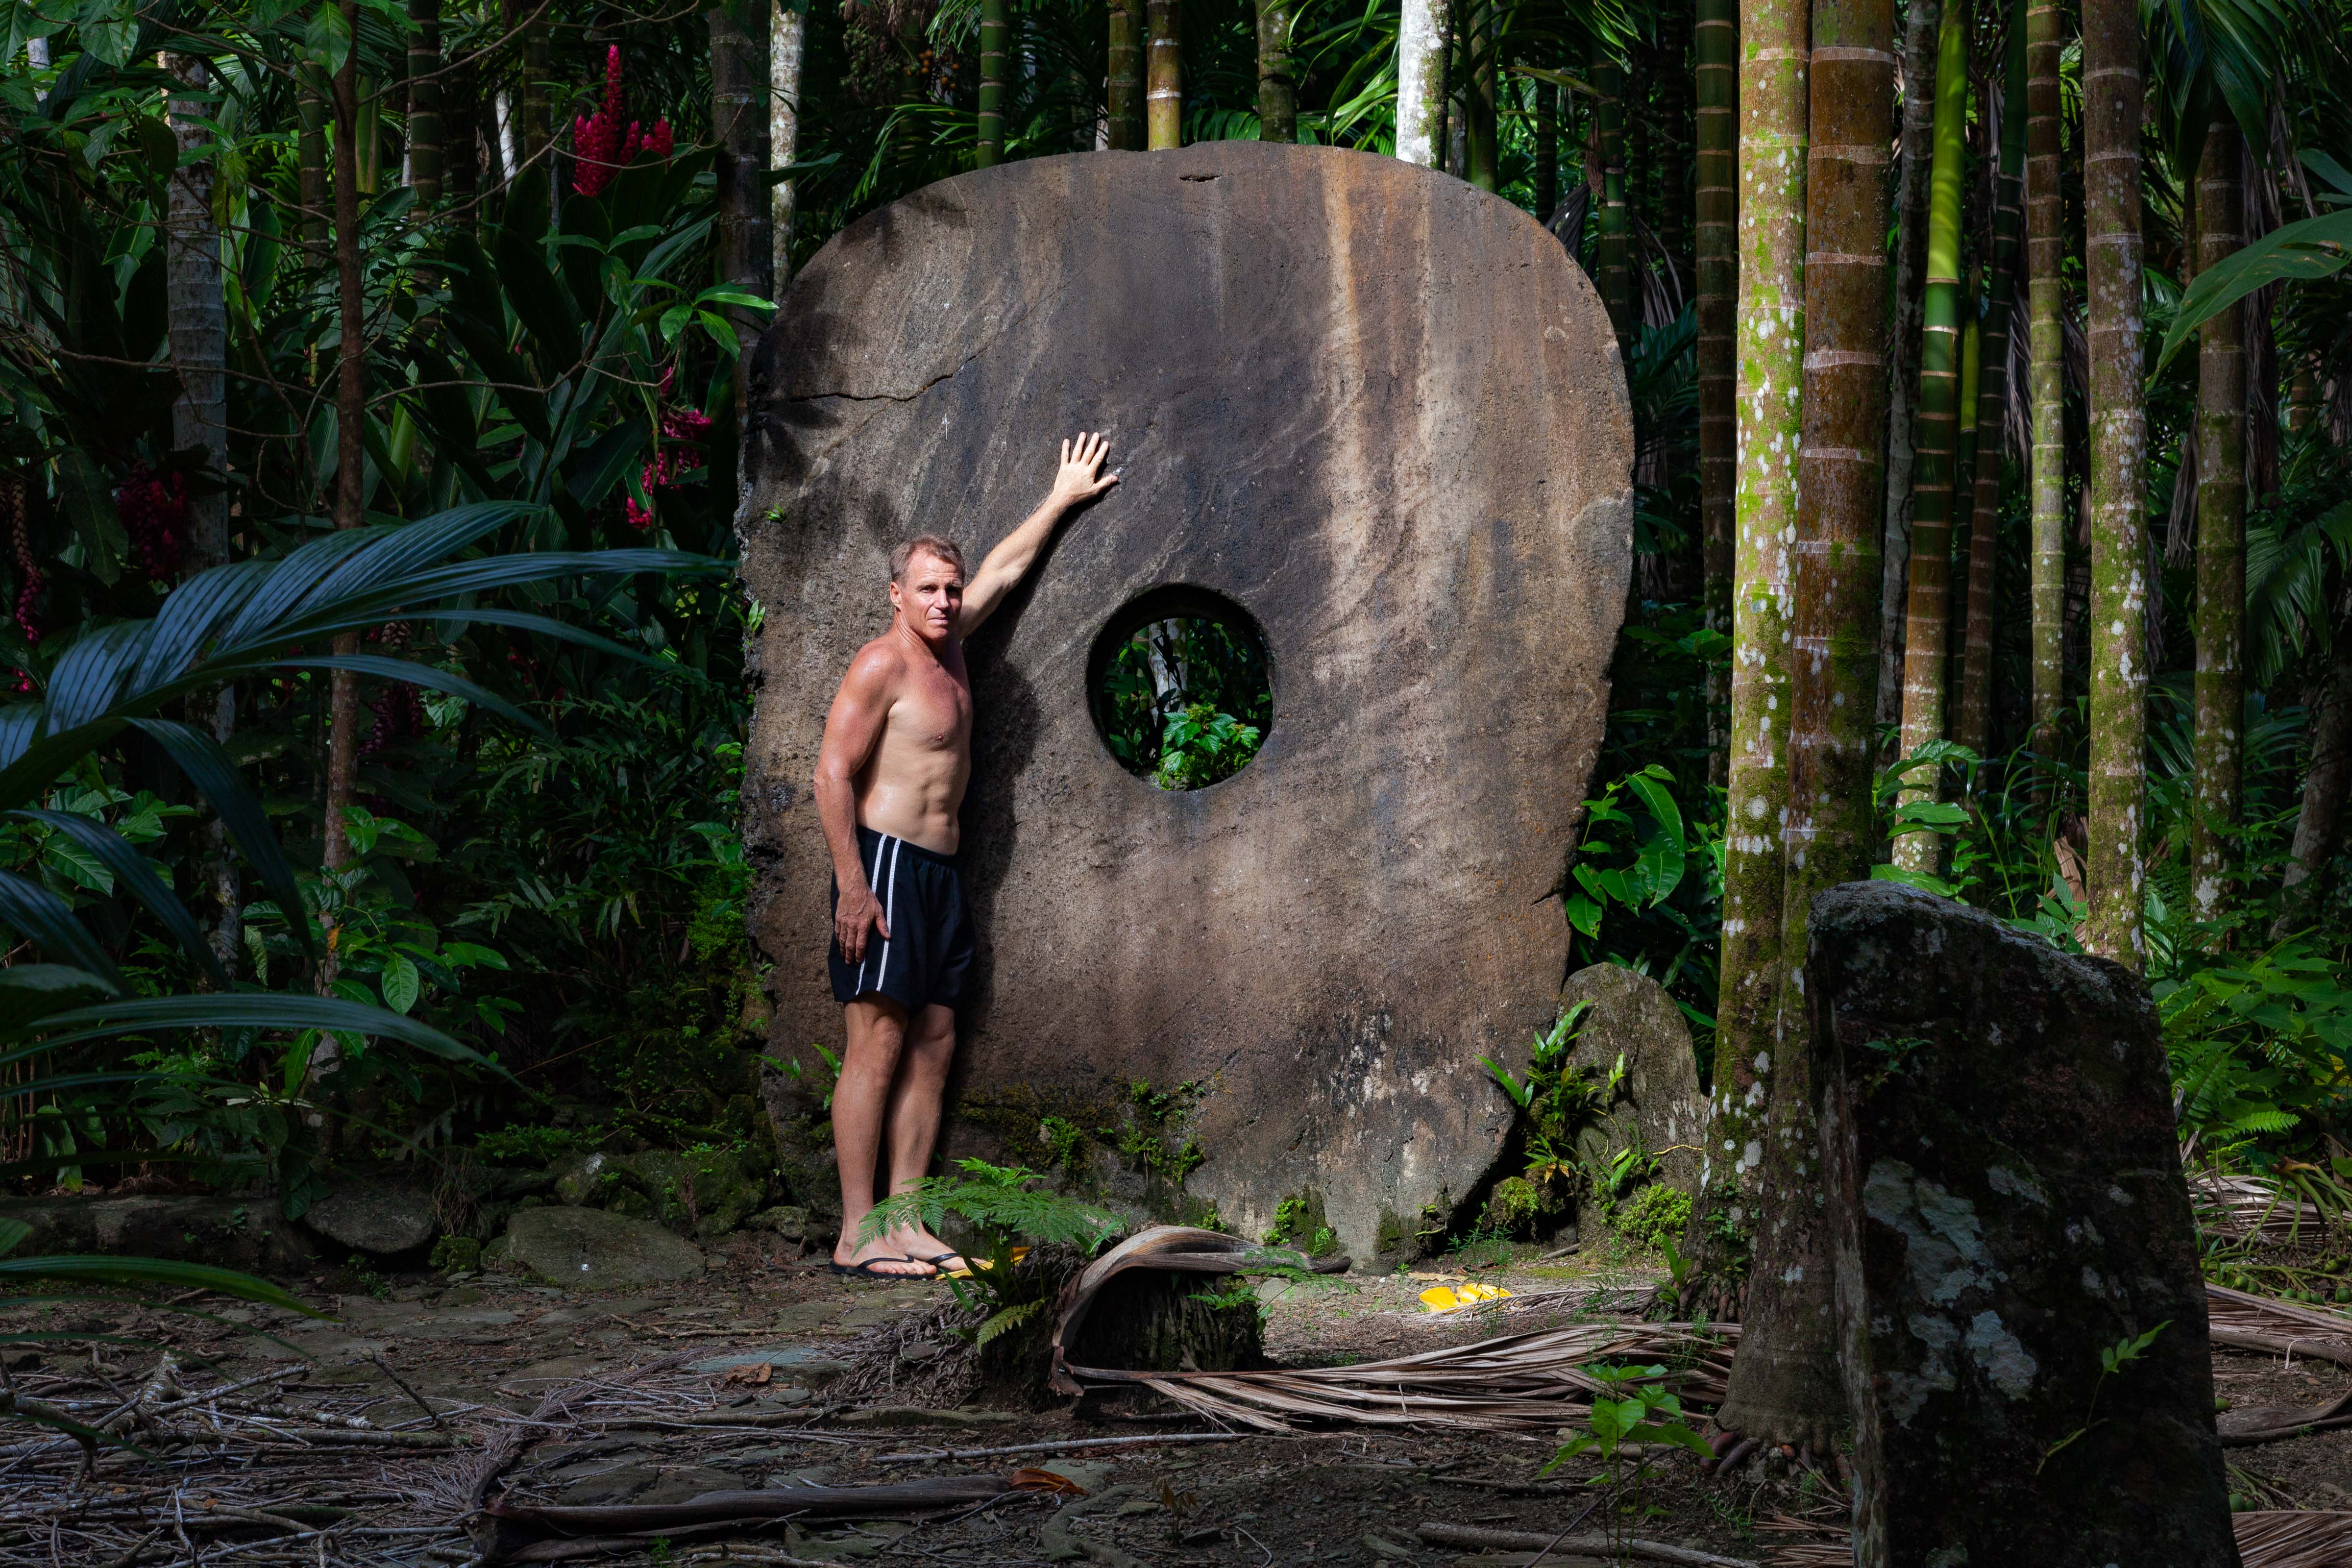 Micronesia, Yap Prov, Second Largest Stone Money In Yap And Jeff Shea, 2012, IMG 3889